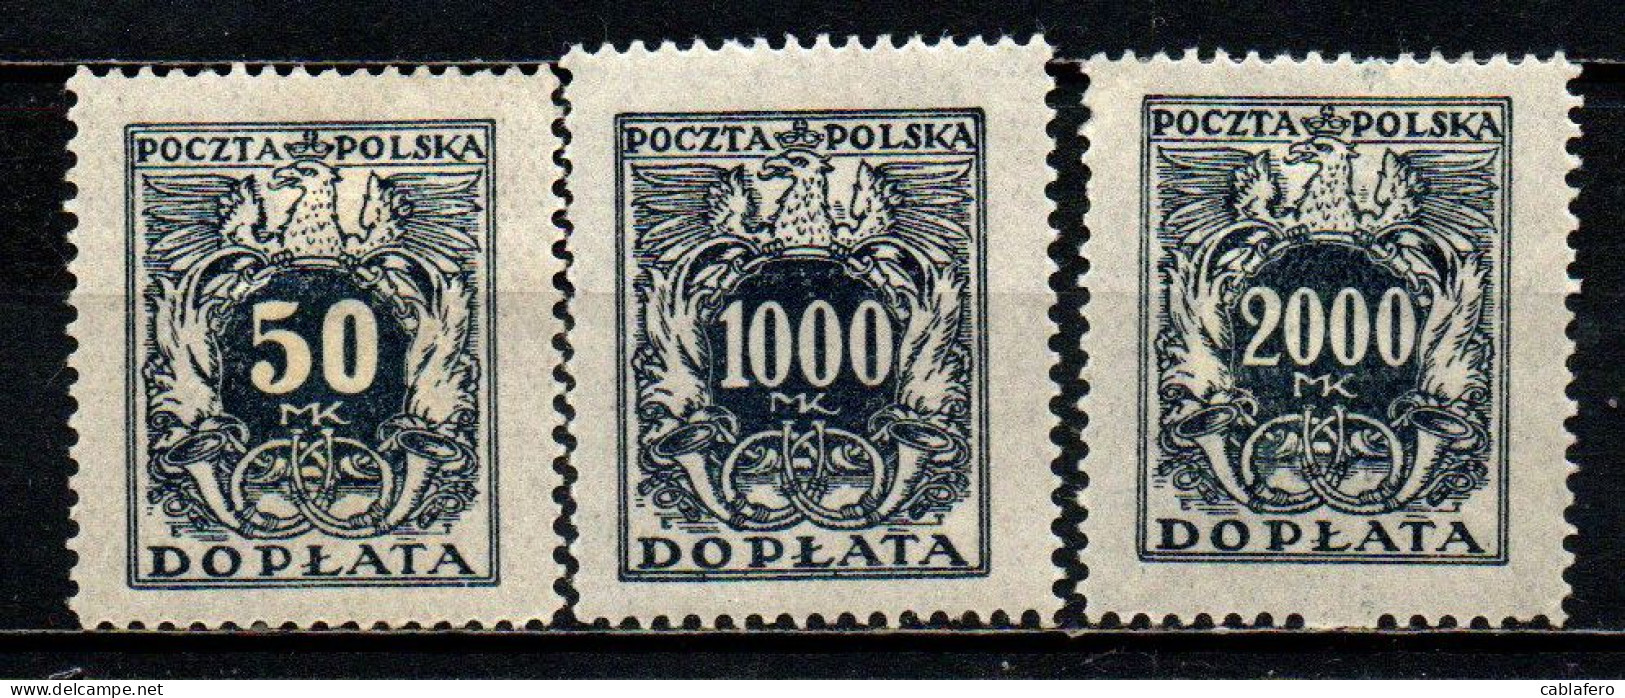 POLONIA - 1923 - Numerals Of Value - MH - Postage Due